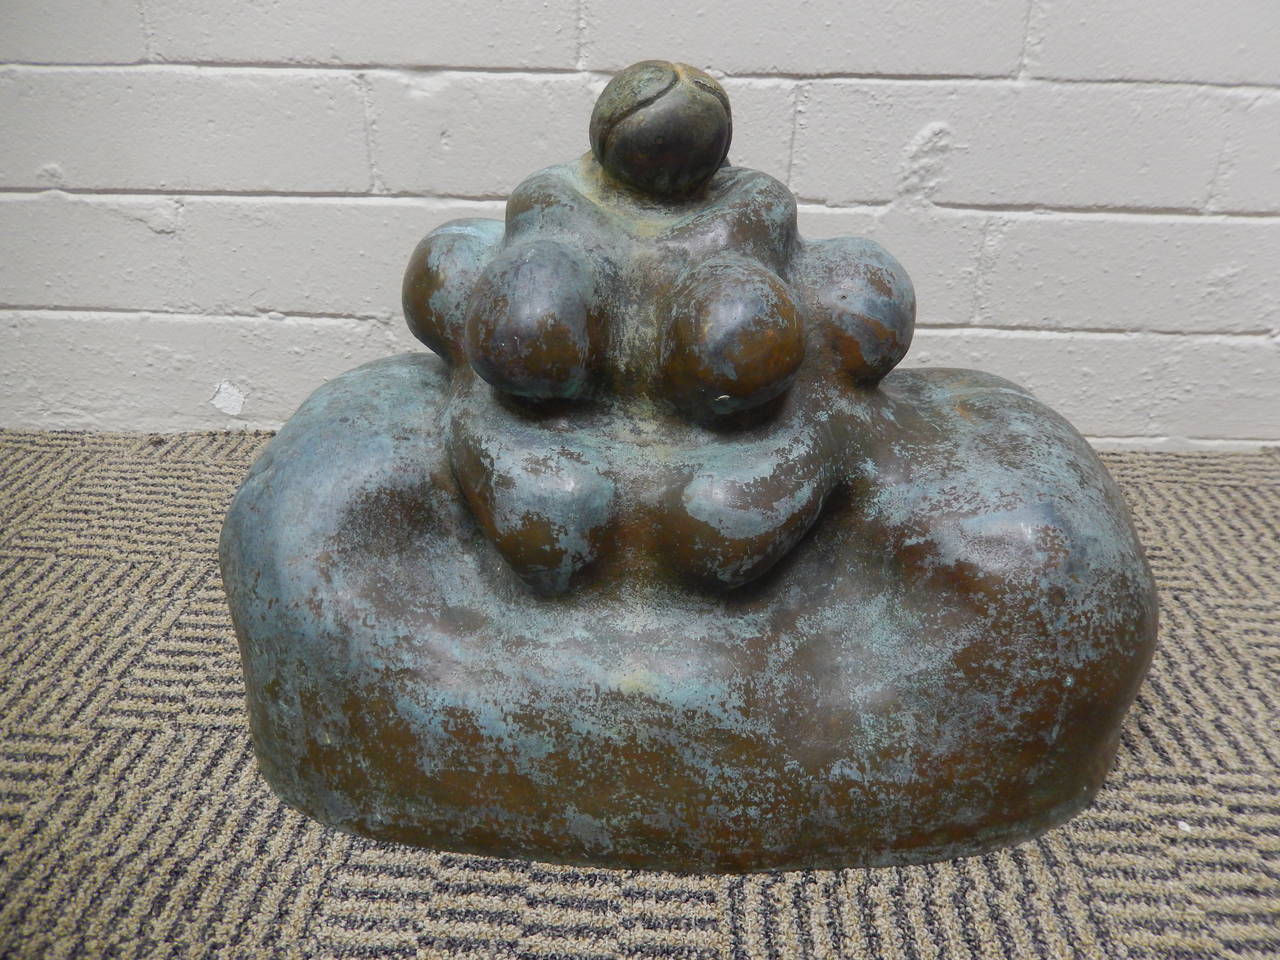 Superb bronze abstract figural sculpture by Bolivian artist Roberto Mamani Mamani, dating to 2001. 

Beautifully rendered bronze depicting what appears to be a mother and children. Expressive and abstract piece.